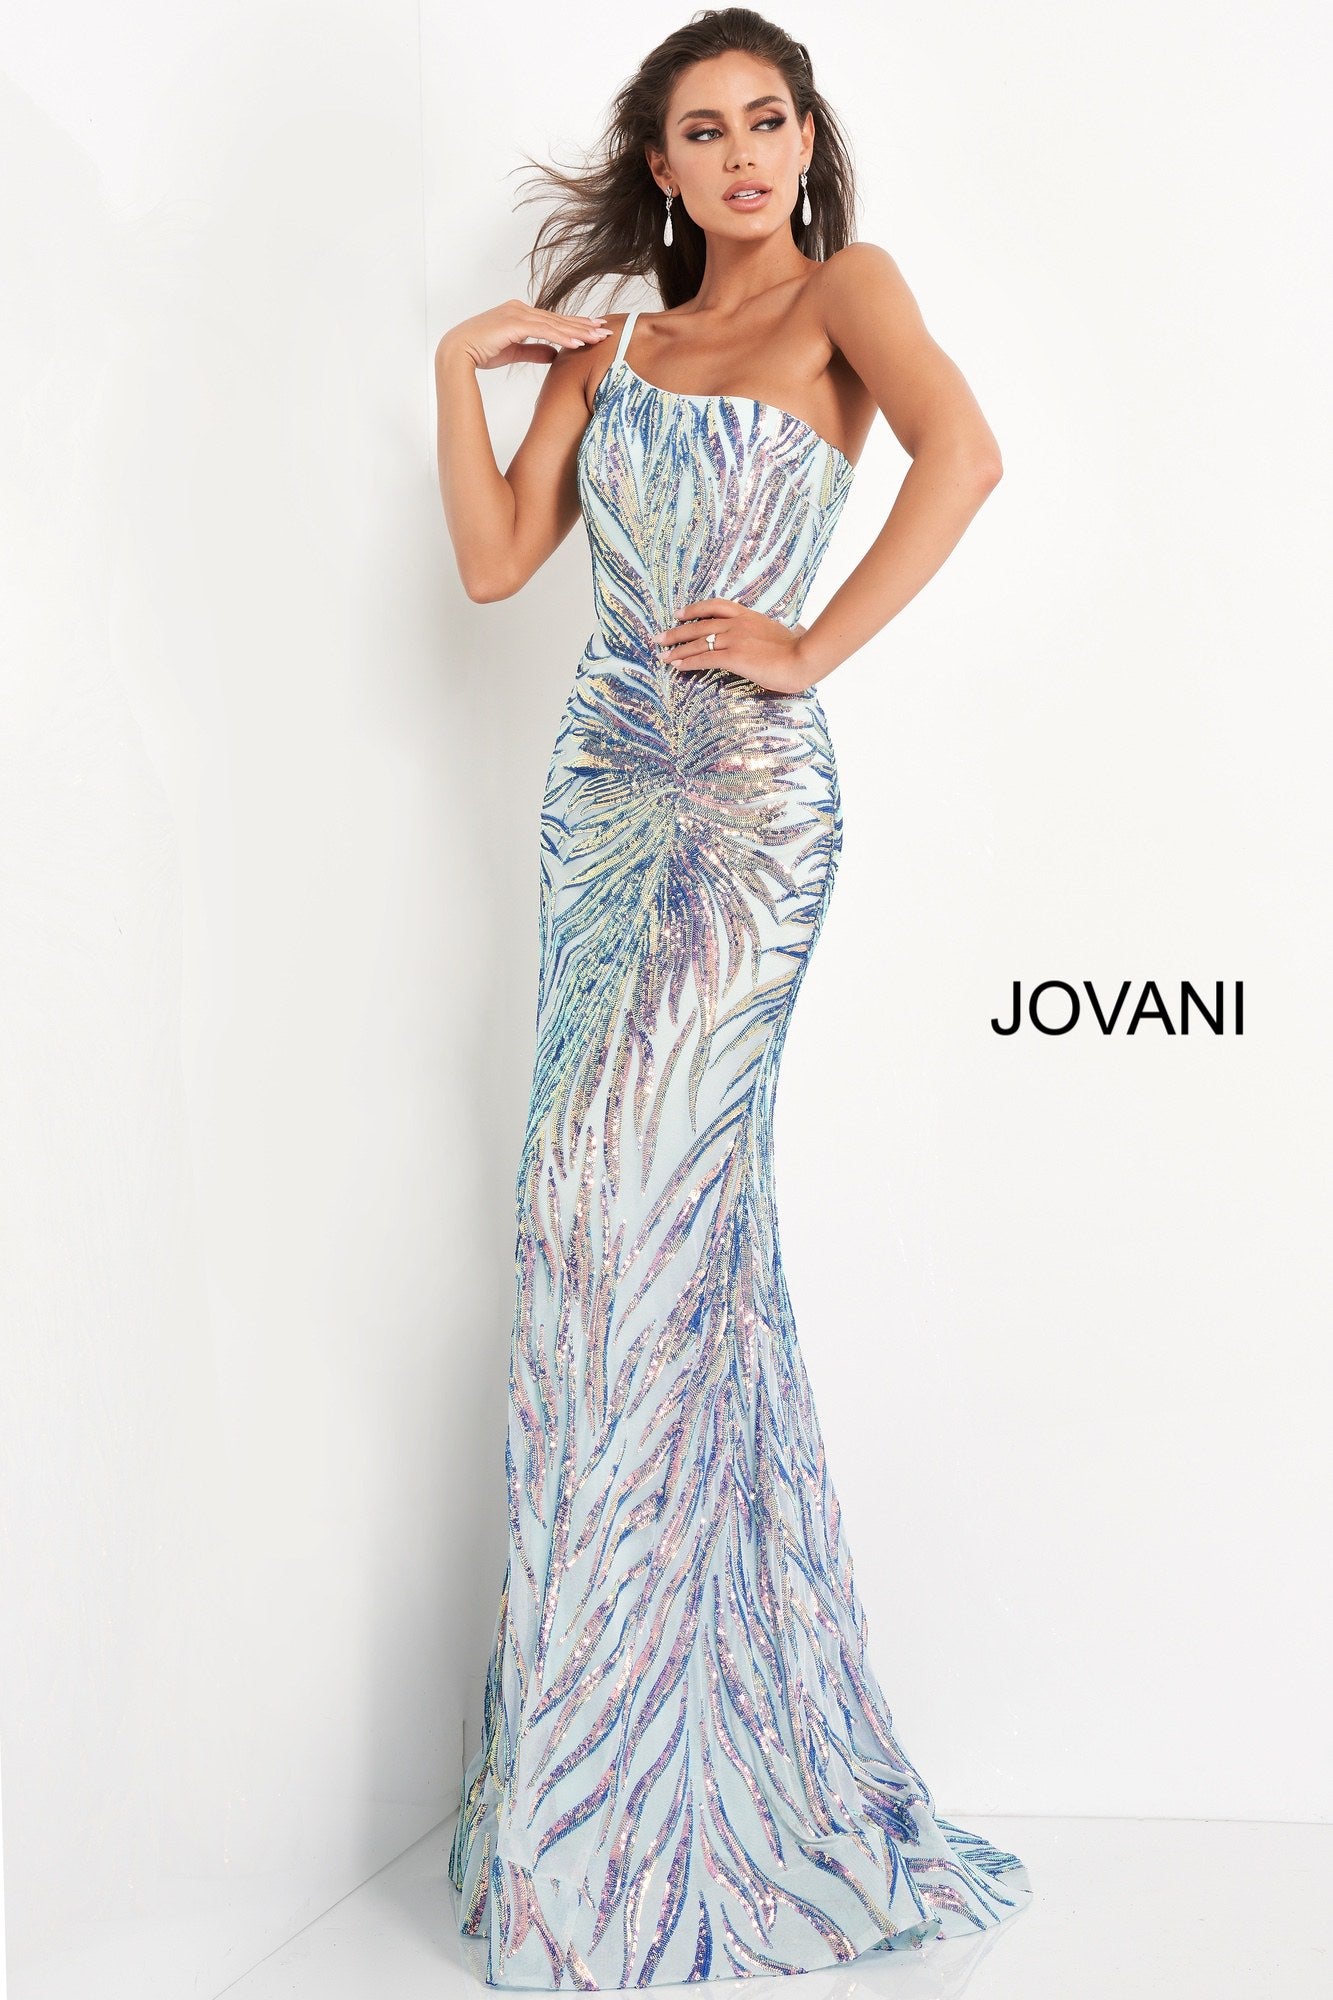 Jovani 05664 is a long fitted formal evening gown. This one shoulder Prom Dress has a Fit & Flare silhouette. Featuring Embellished Sequin Asymmetrical  Starburst patterns that accentuate any figure! Lush sweeping train is perfect for Pageant Presence on stage!  Available Sizes: 00,0,2,4,6,8,10,12,14,16,18,20,22,24  Available Colors: Mint/Multi